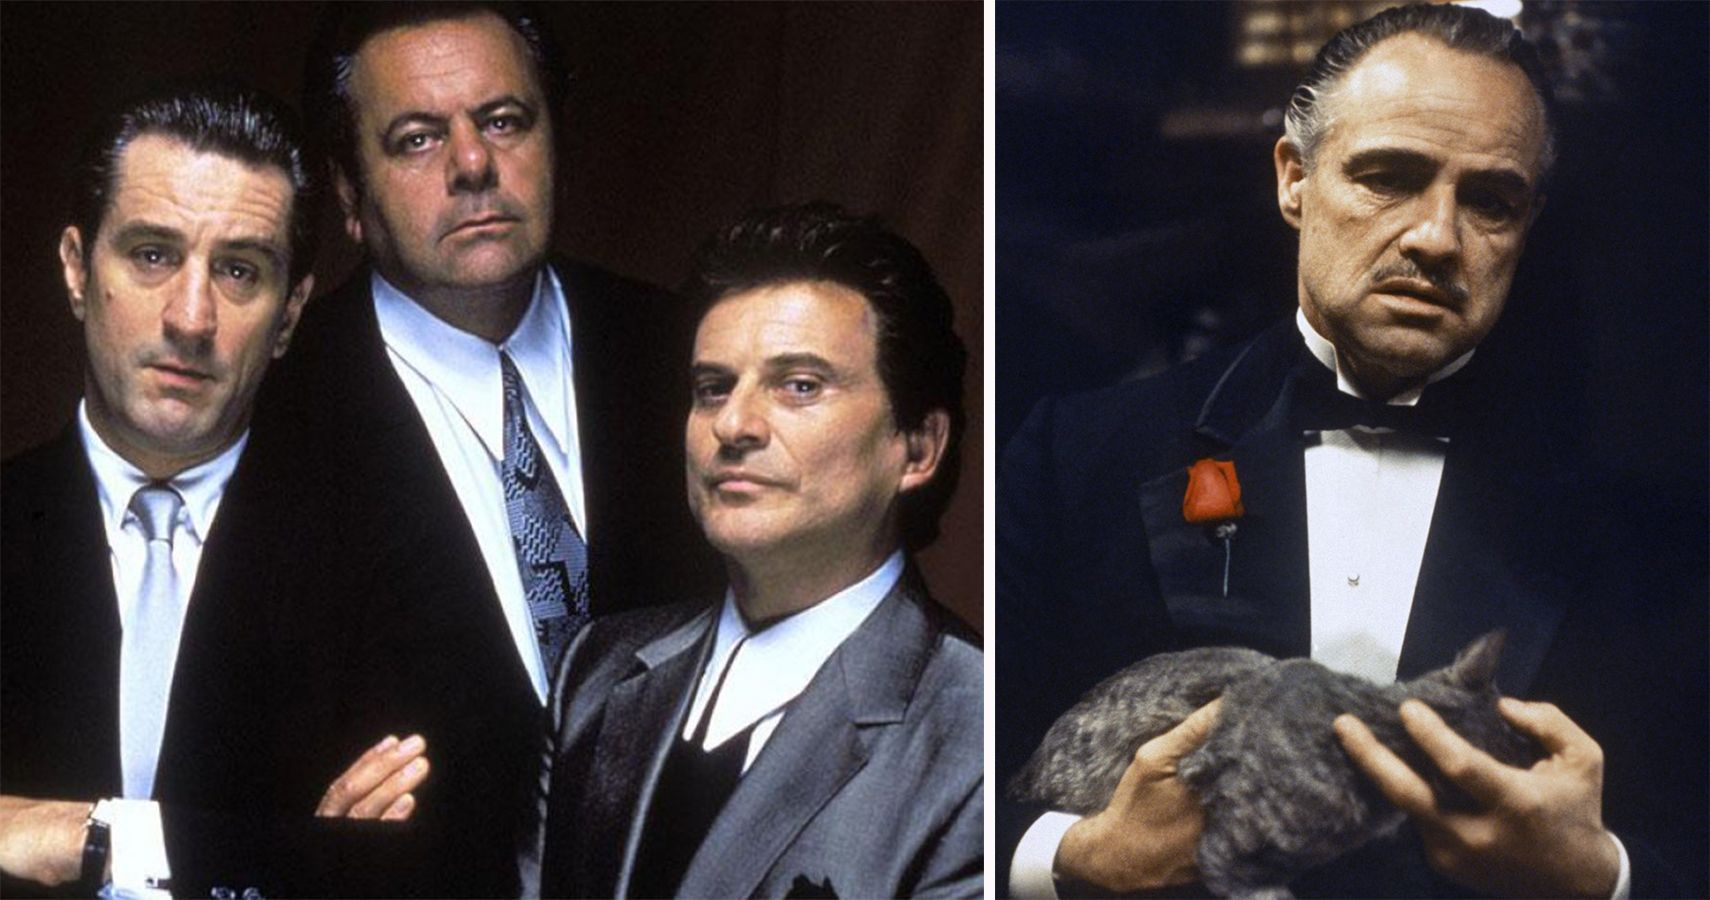 “Leave The Gun, Take the Cannoli” & 9 Other Iconic Lines From Mob Movies